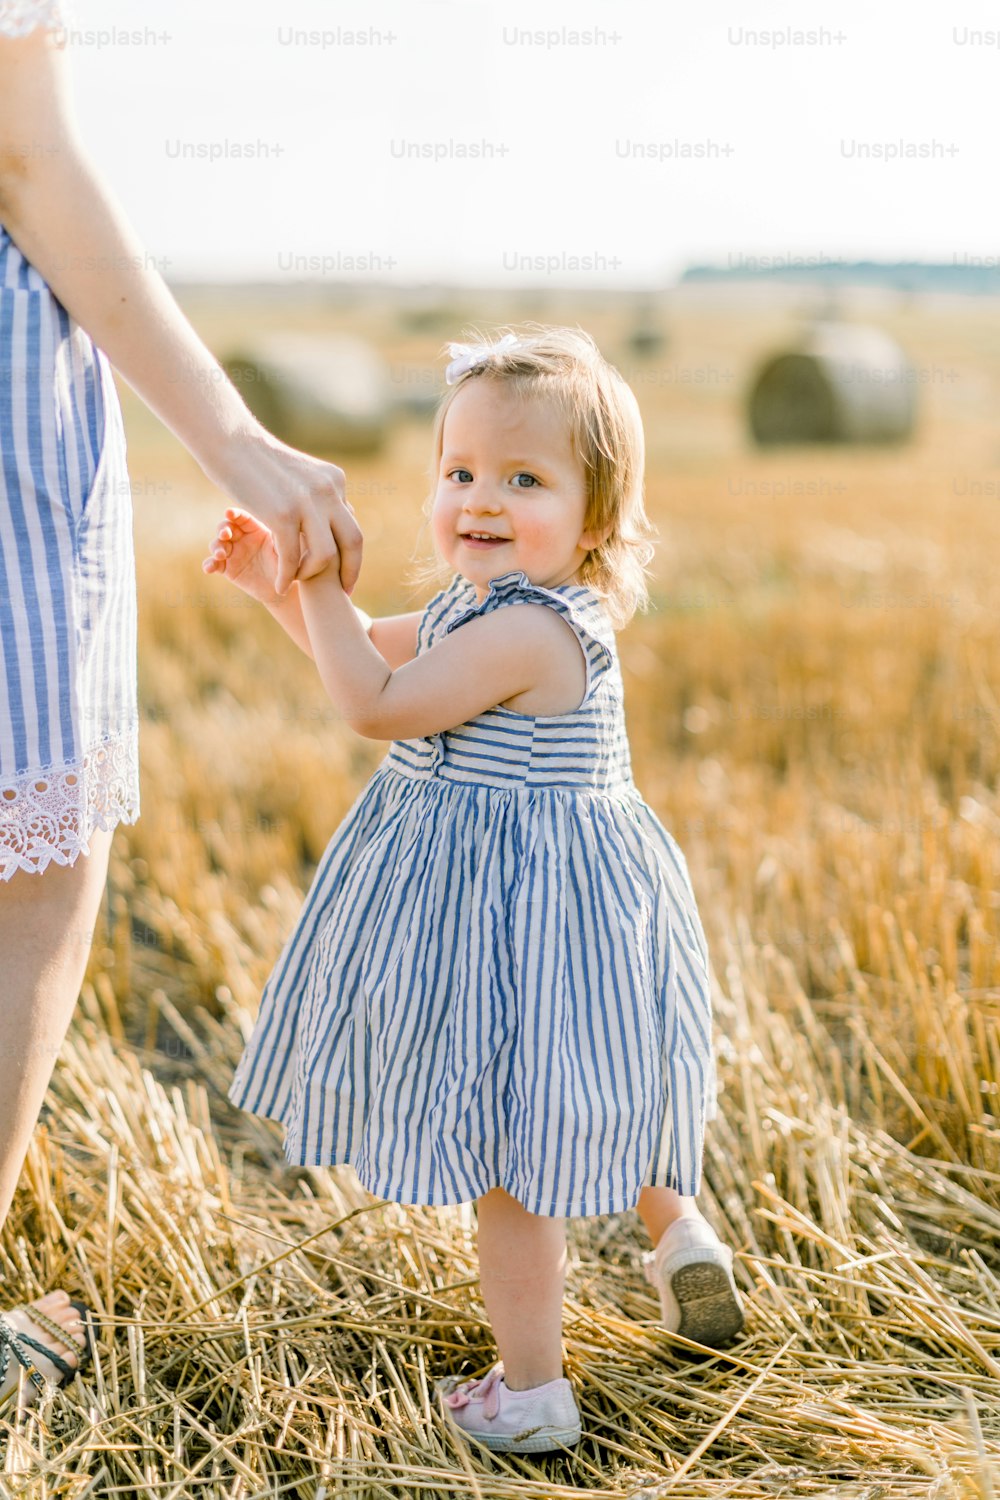 Emotional portrait of a happy and joyful little girl in striped dress, holding hand of her mom while walking together in a wheat field with hay bales in the rays of the sunset. Summer. Childhood.